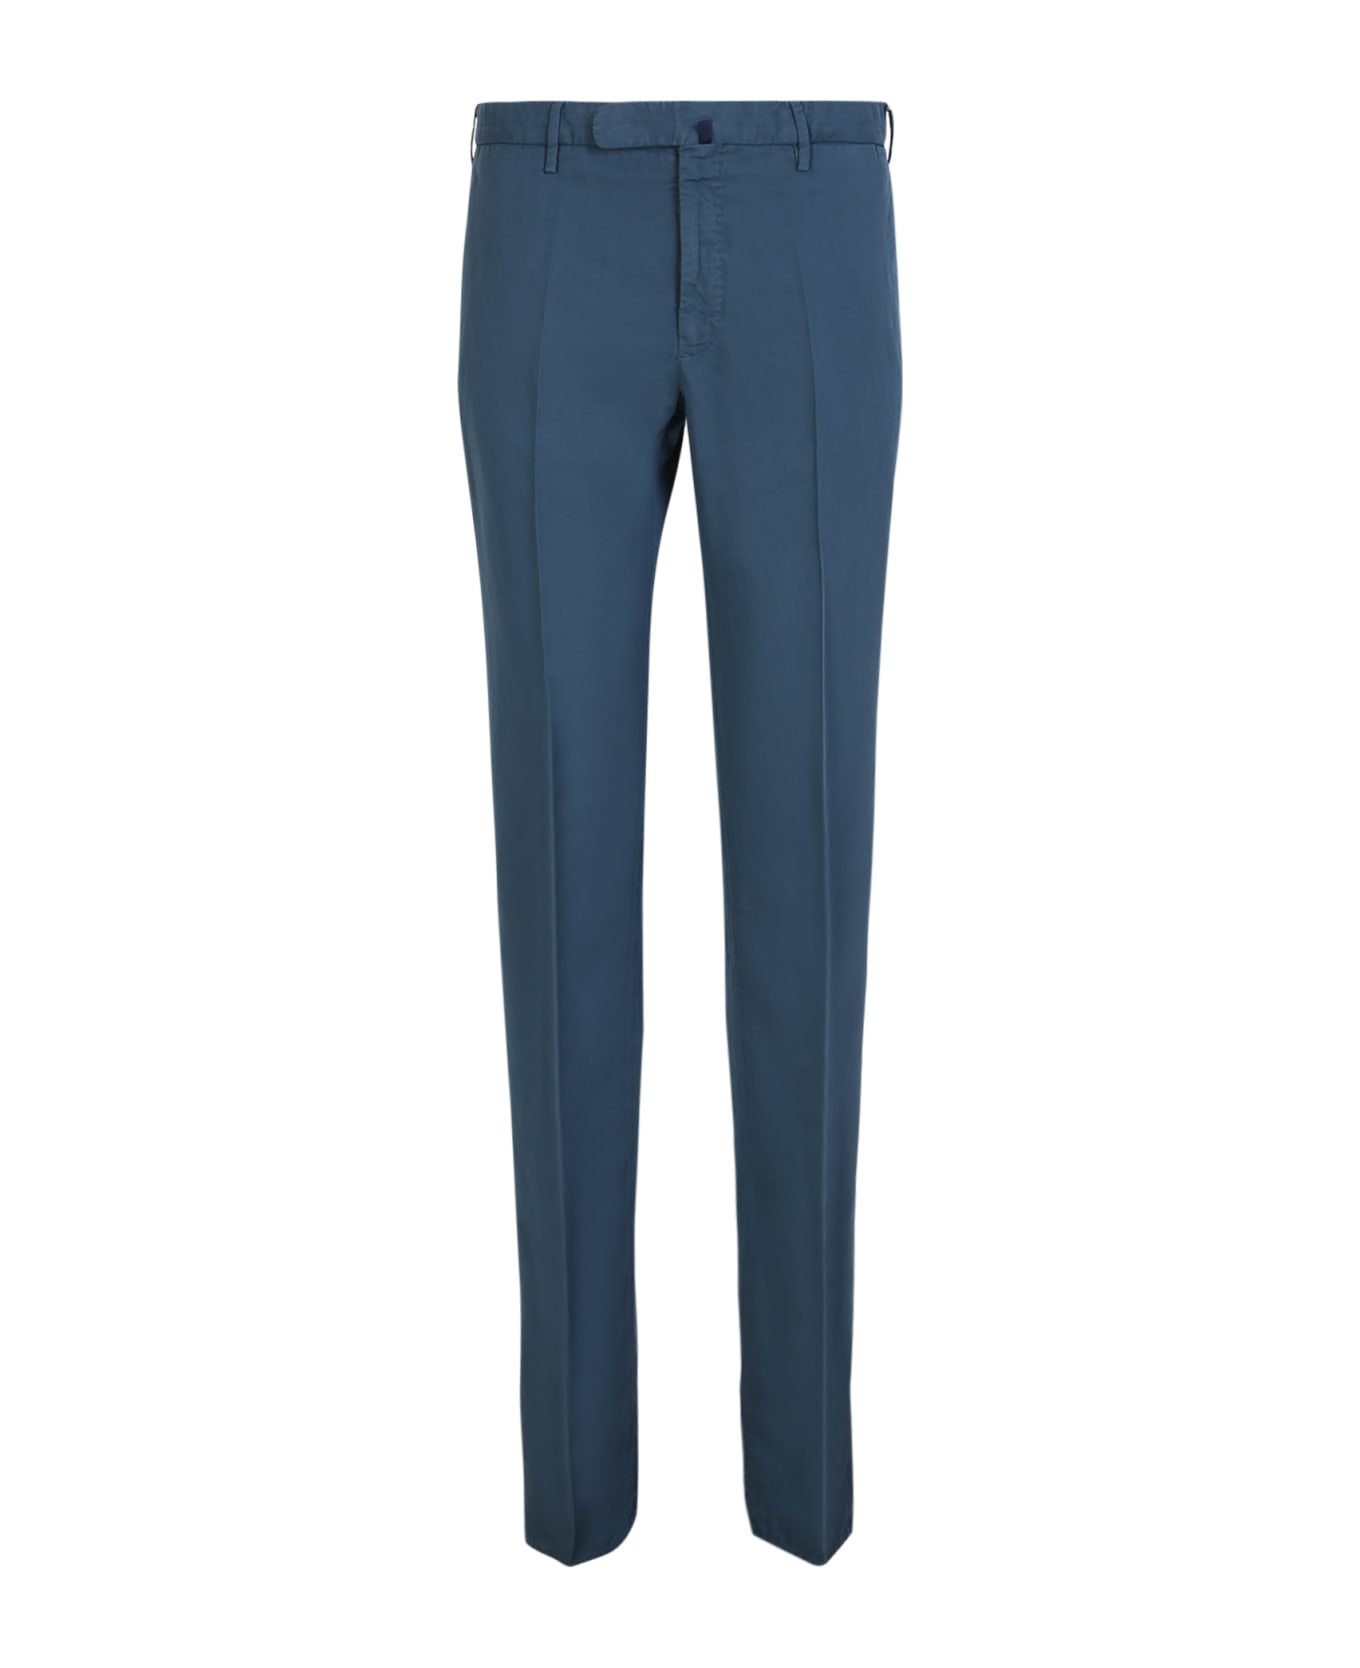 Incotex Blue Tailored Trousers - Blue ボトムス